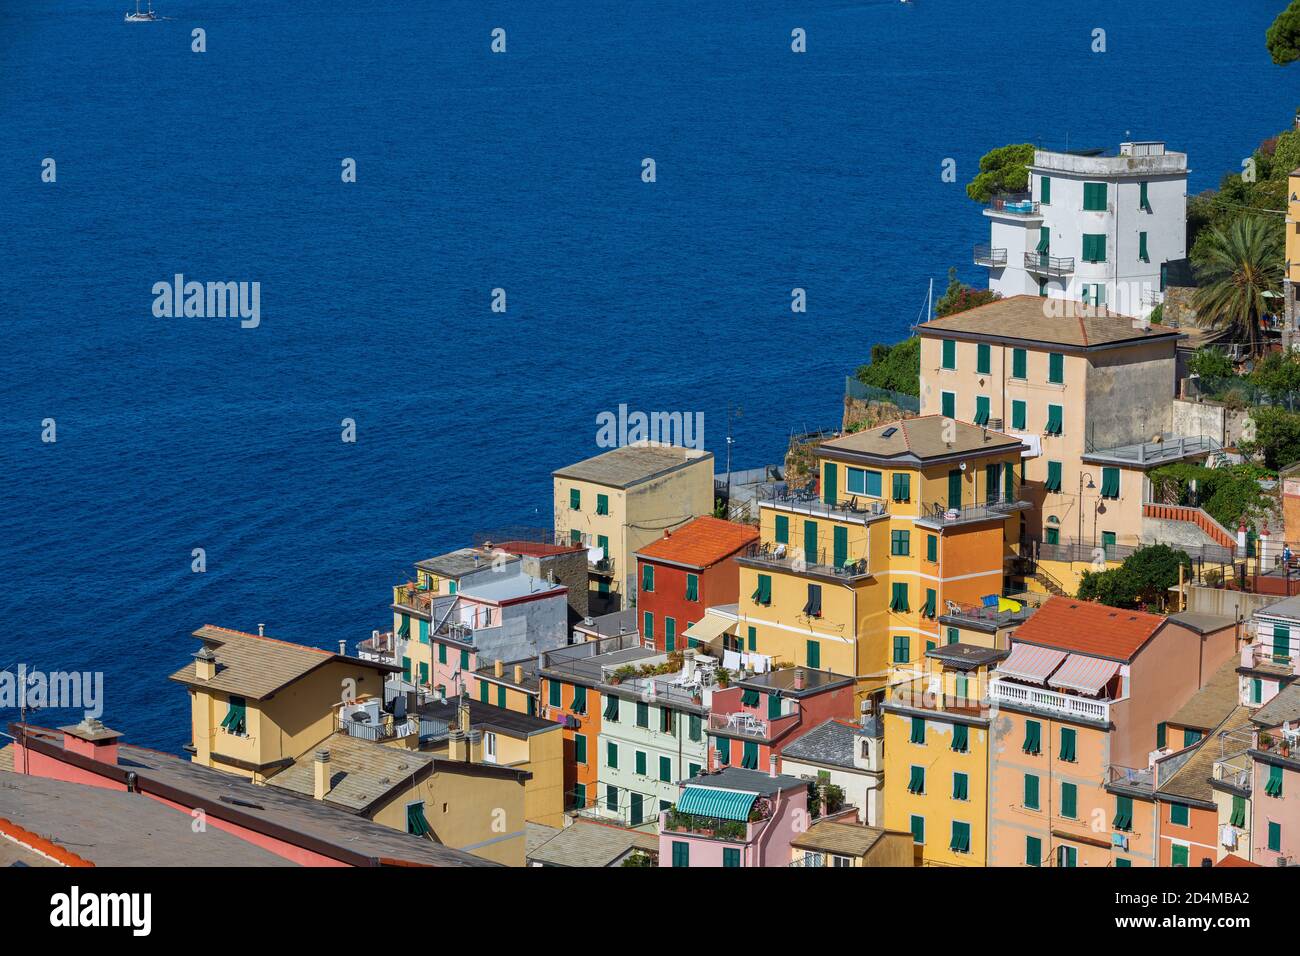 Ancient colorful village houses on the open sea. Location: city of Riomaggiore in the Italian region of Liguria. Perched buildings. Stock Photo